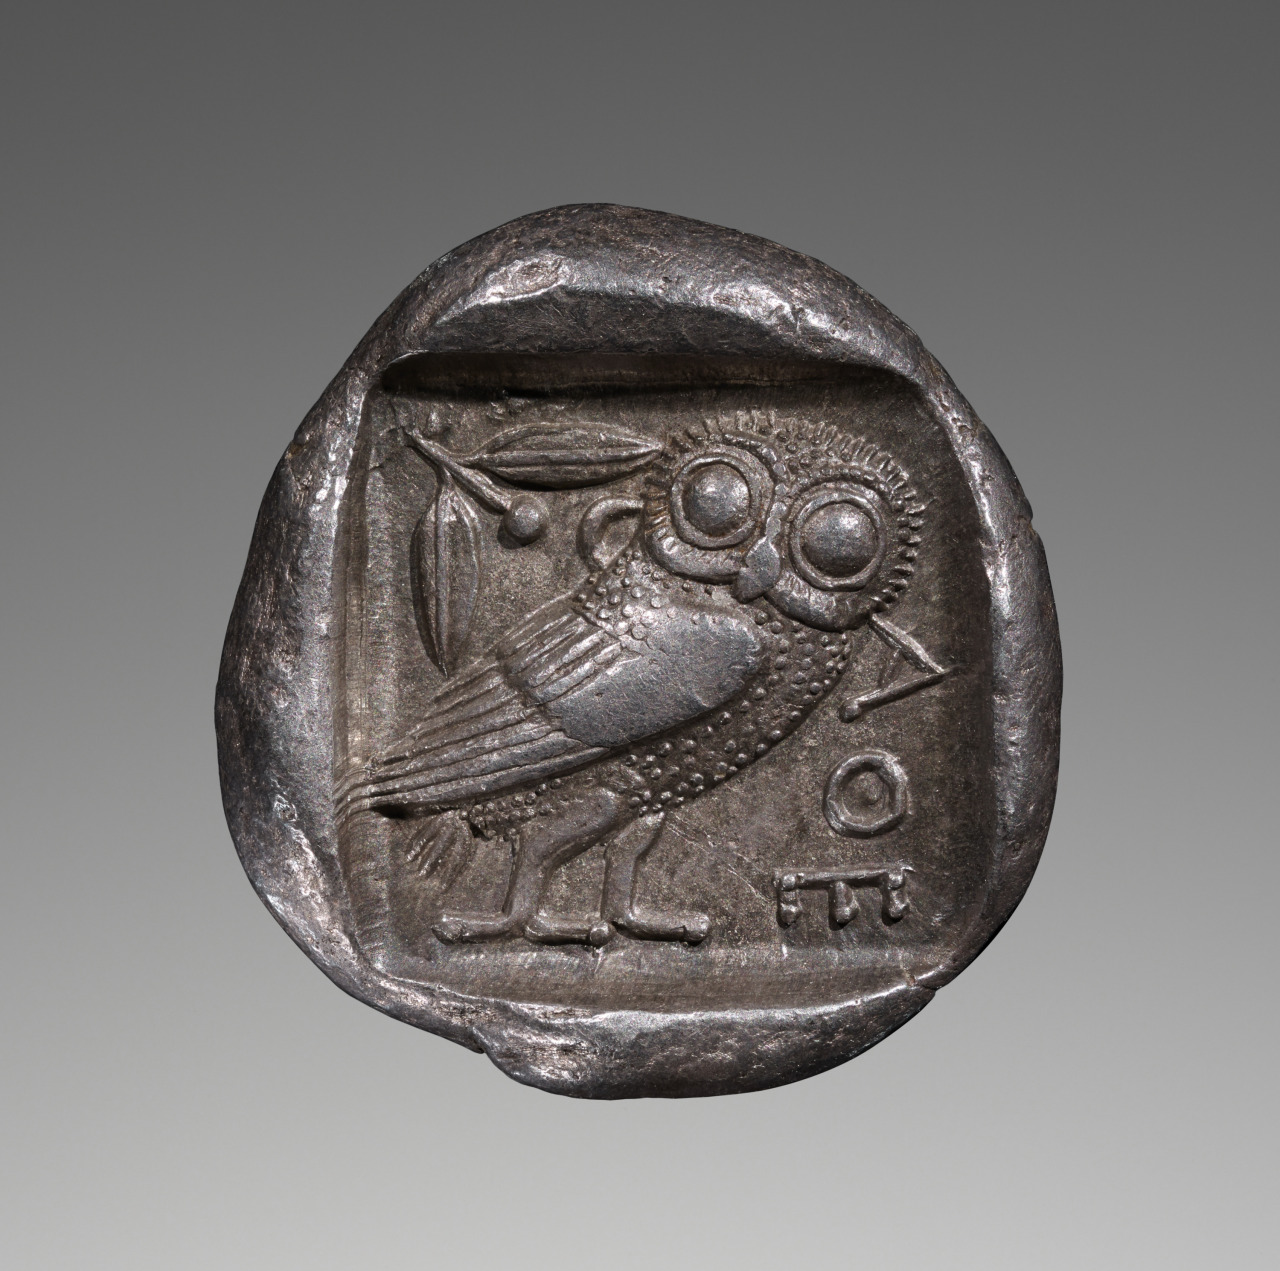 An Athenian silver tetradrachm ca. 475–465 B.C., showing Athena's owl and an olive branch.jpg